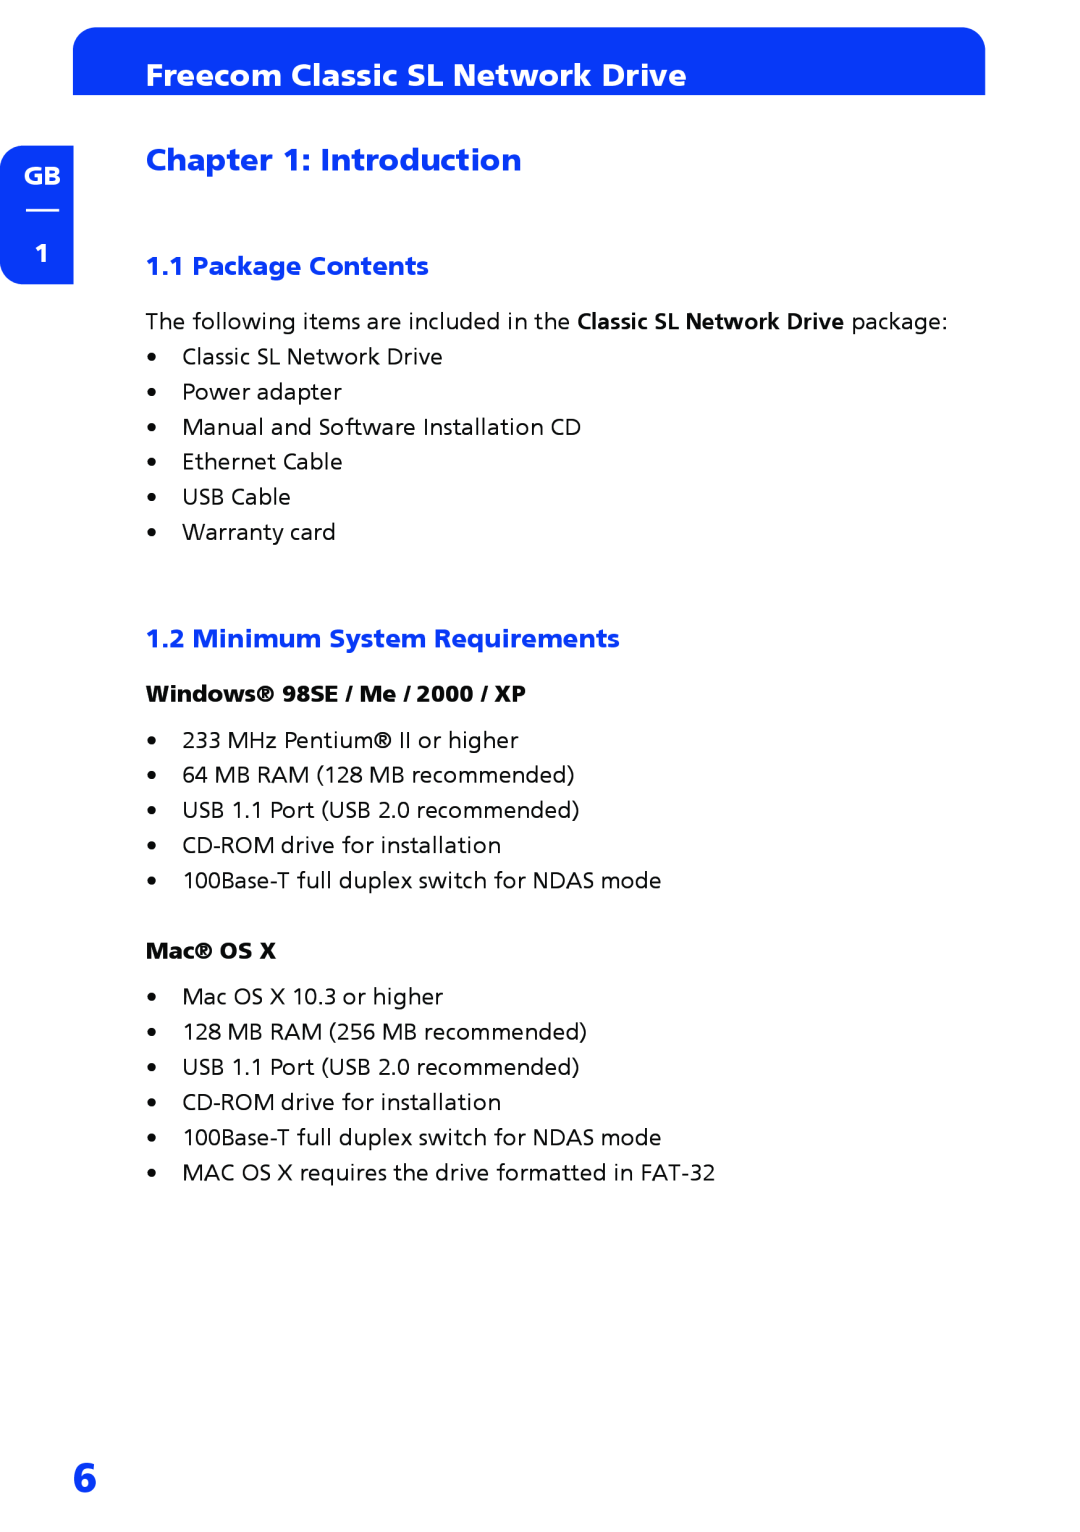 Freecom Technologies Network hard drive Freecom Classic SL Network Drive, Package Contents, Minimum System Requirements 